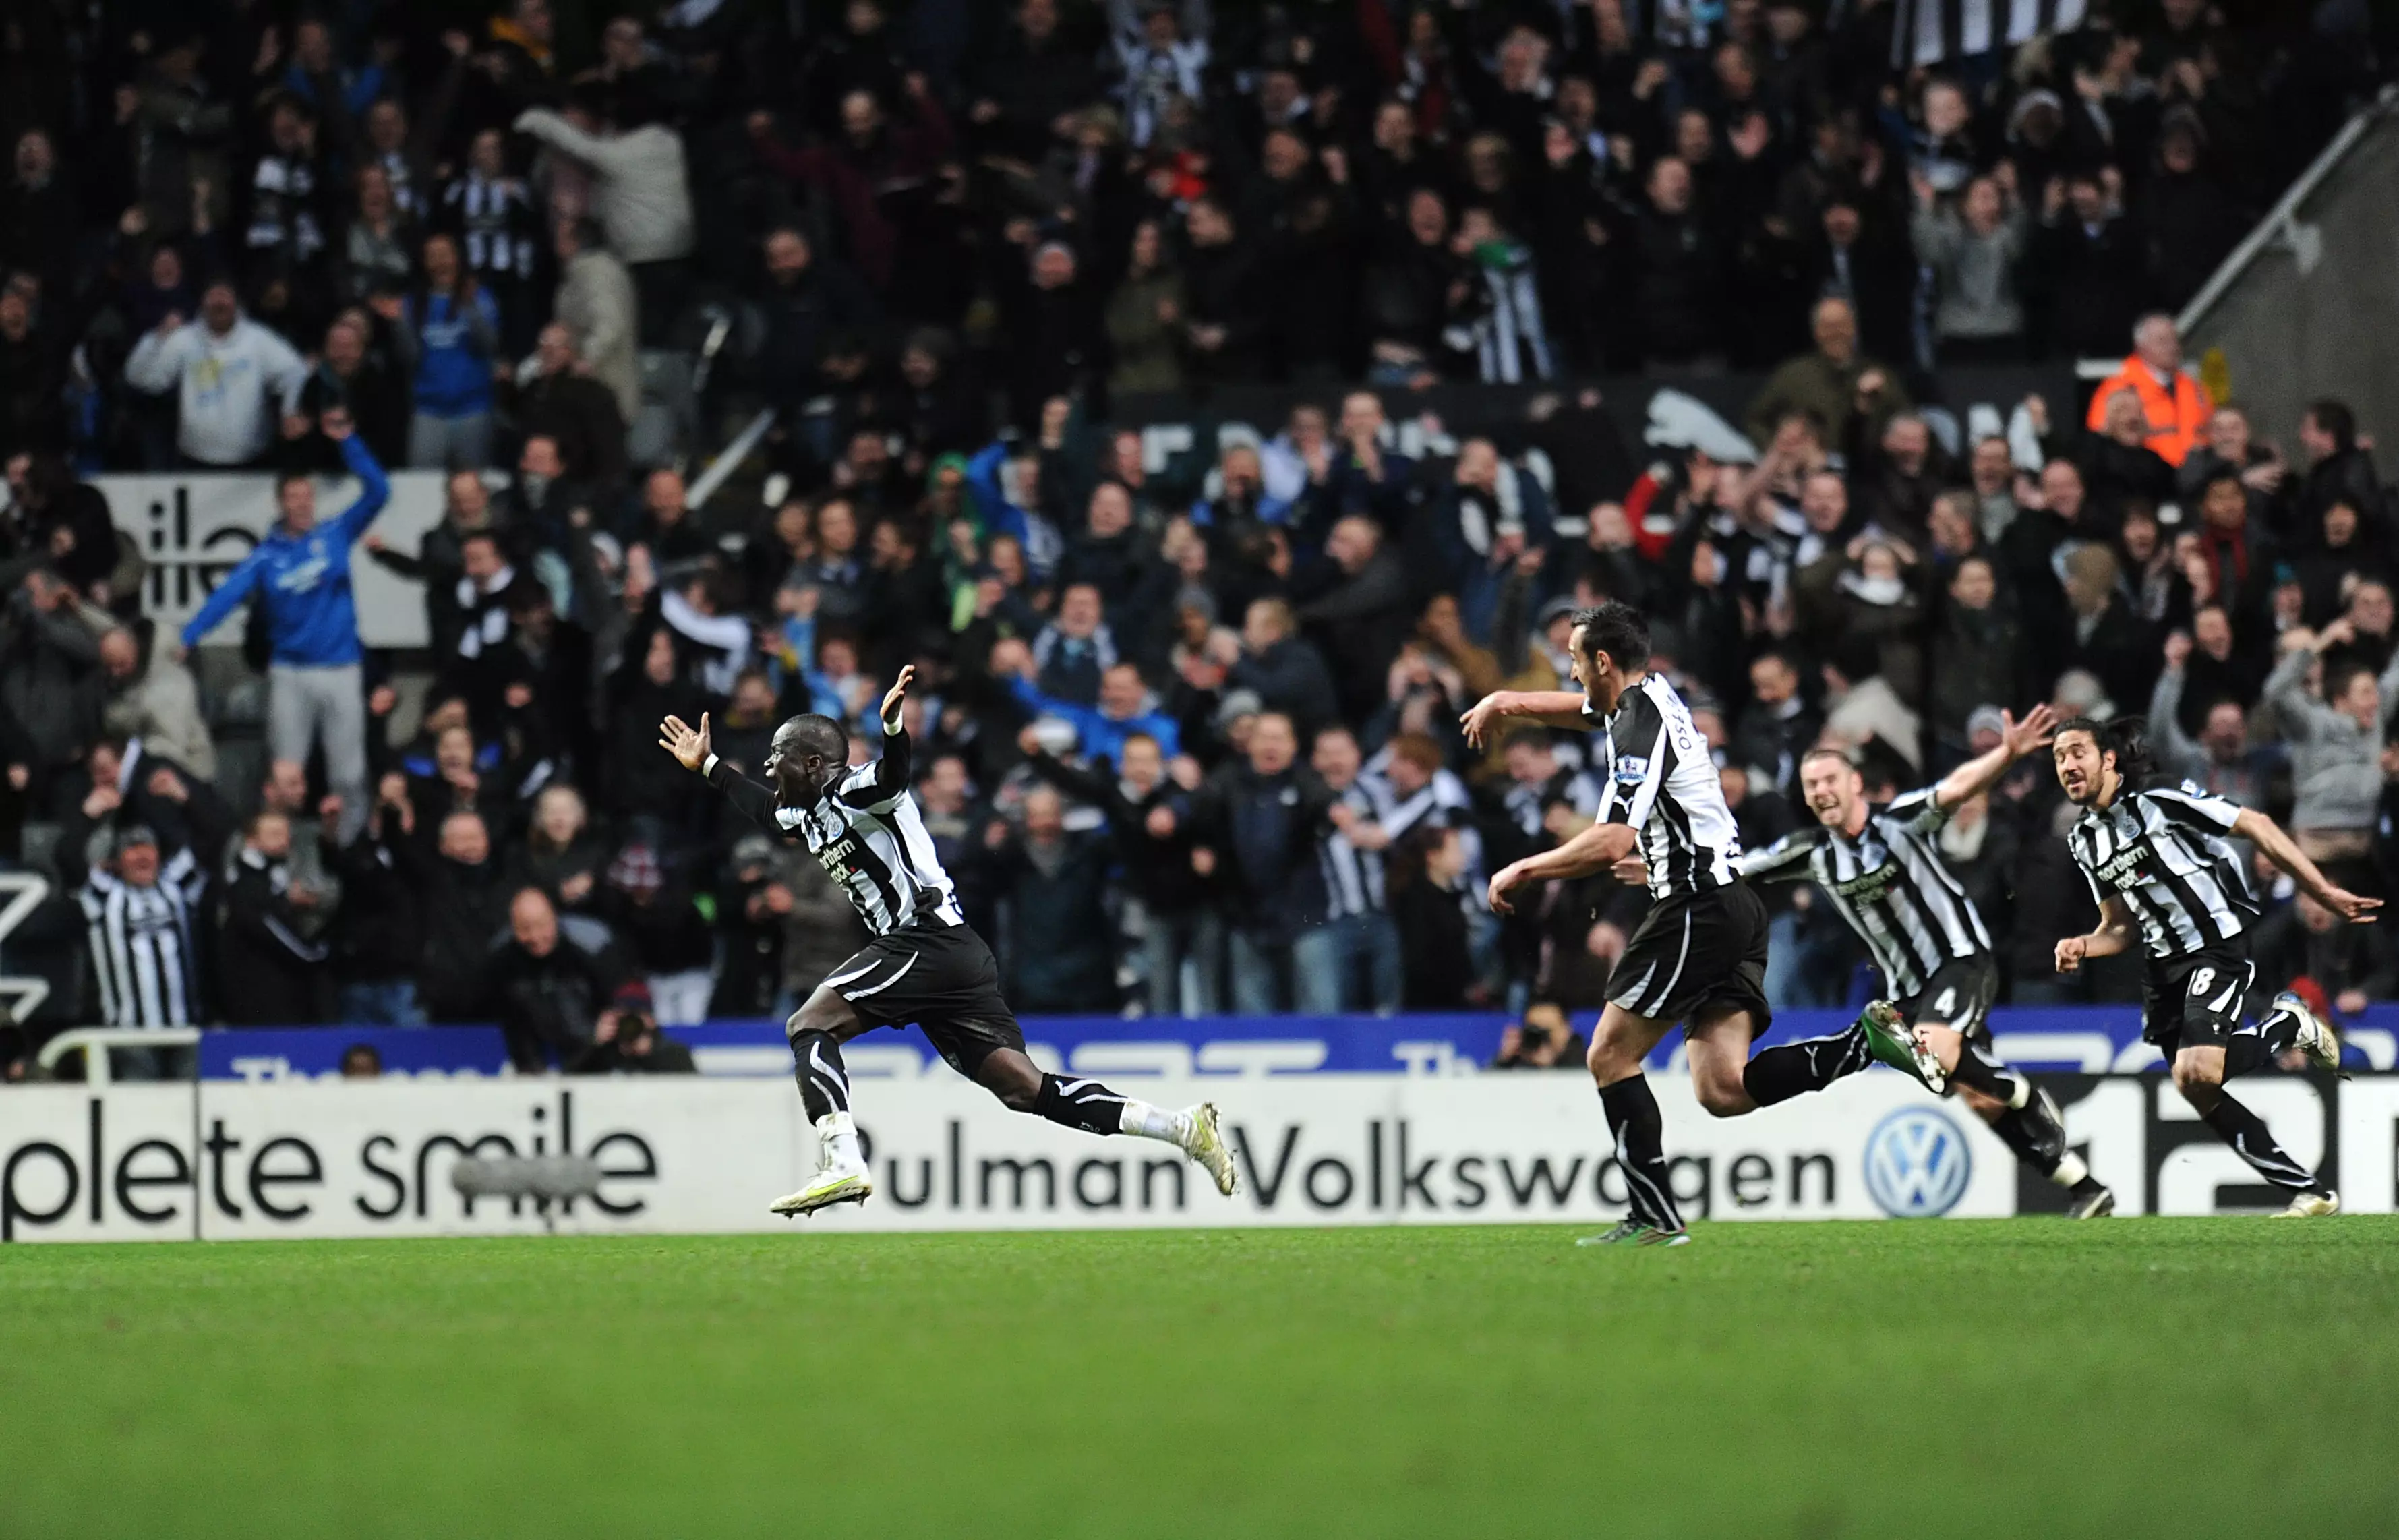 The Newcastle players chase their goalscorer in celebration. Image: PA Images